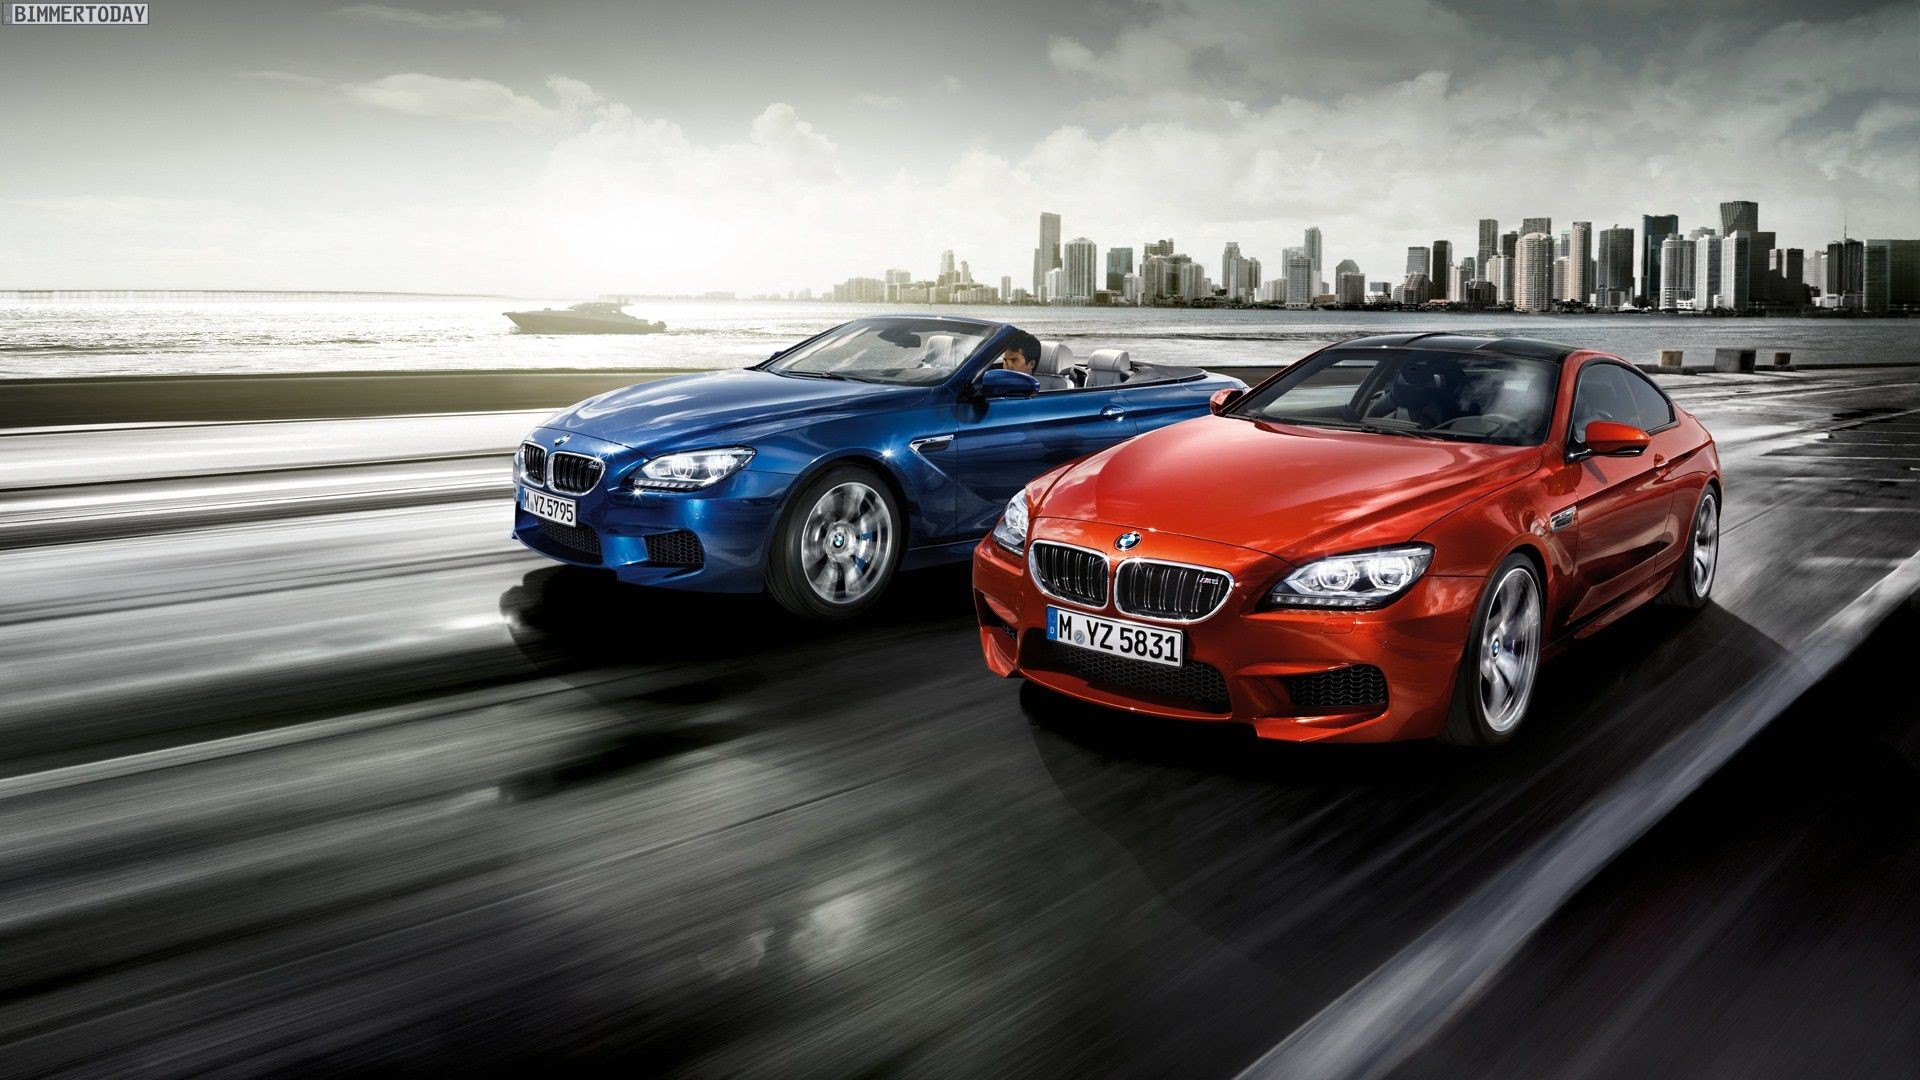 1920x1080 Most Downloaded Bmw Wallpapers - Full HD wallpaper search | Adrian  Park_1972 | Pinterest | BMW and Wallpaper